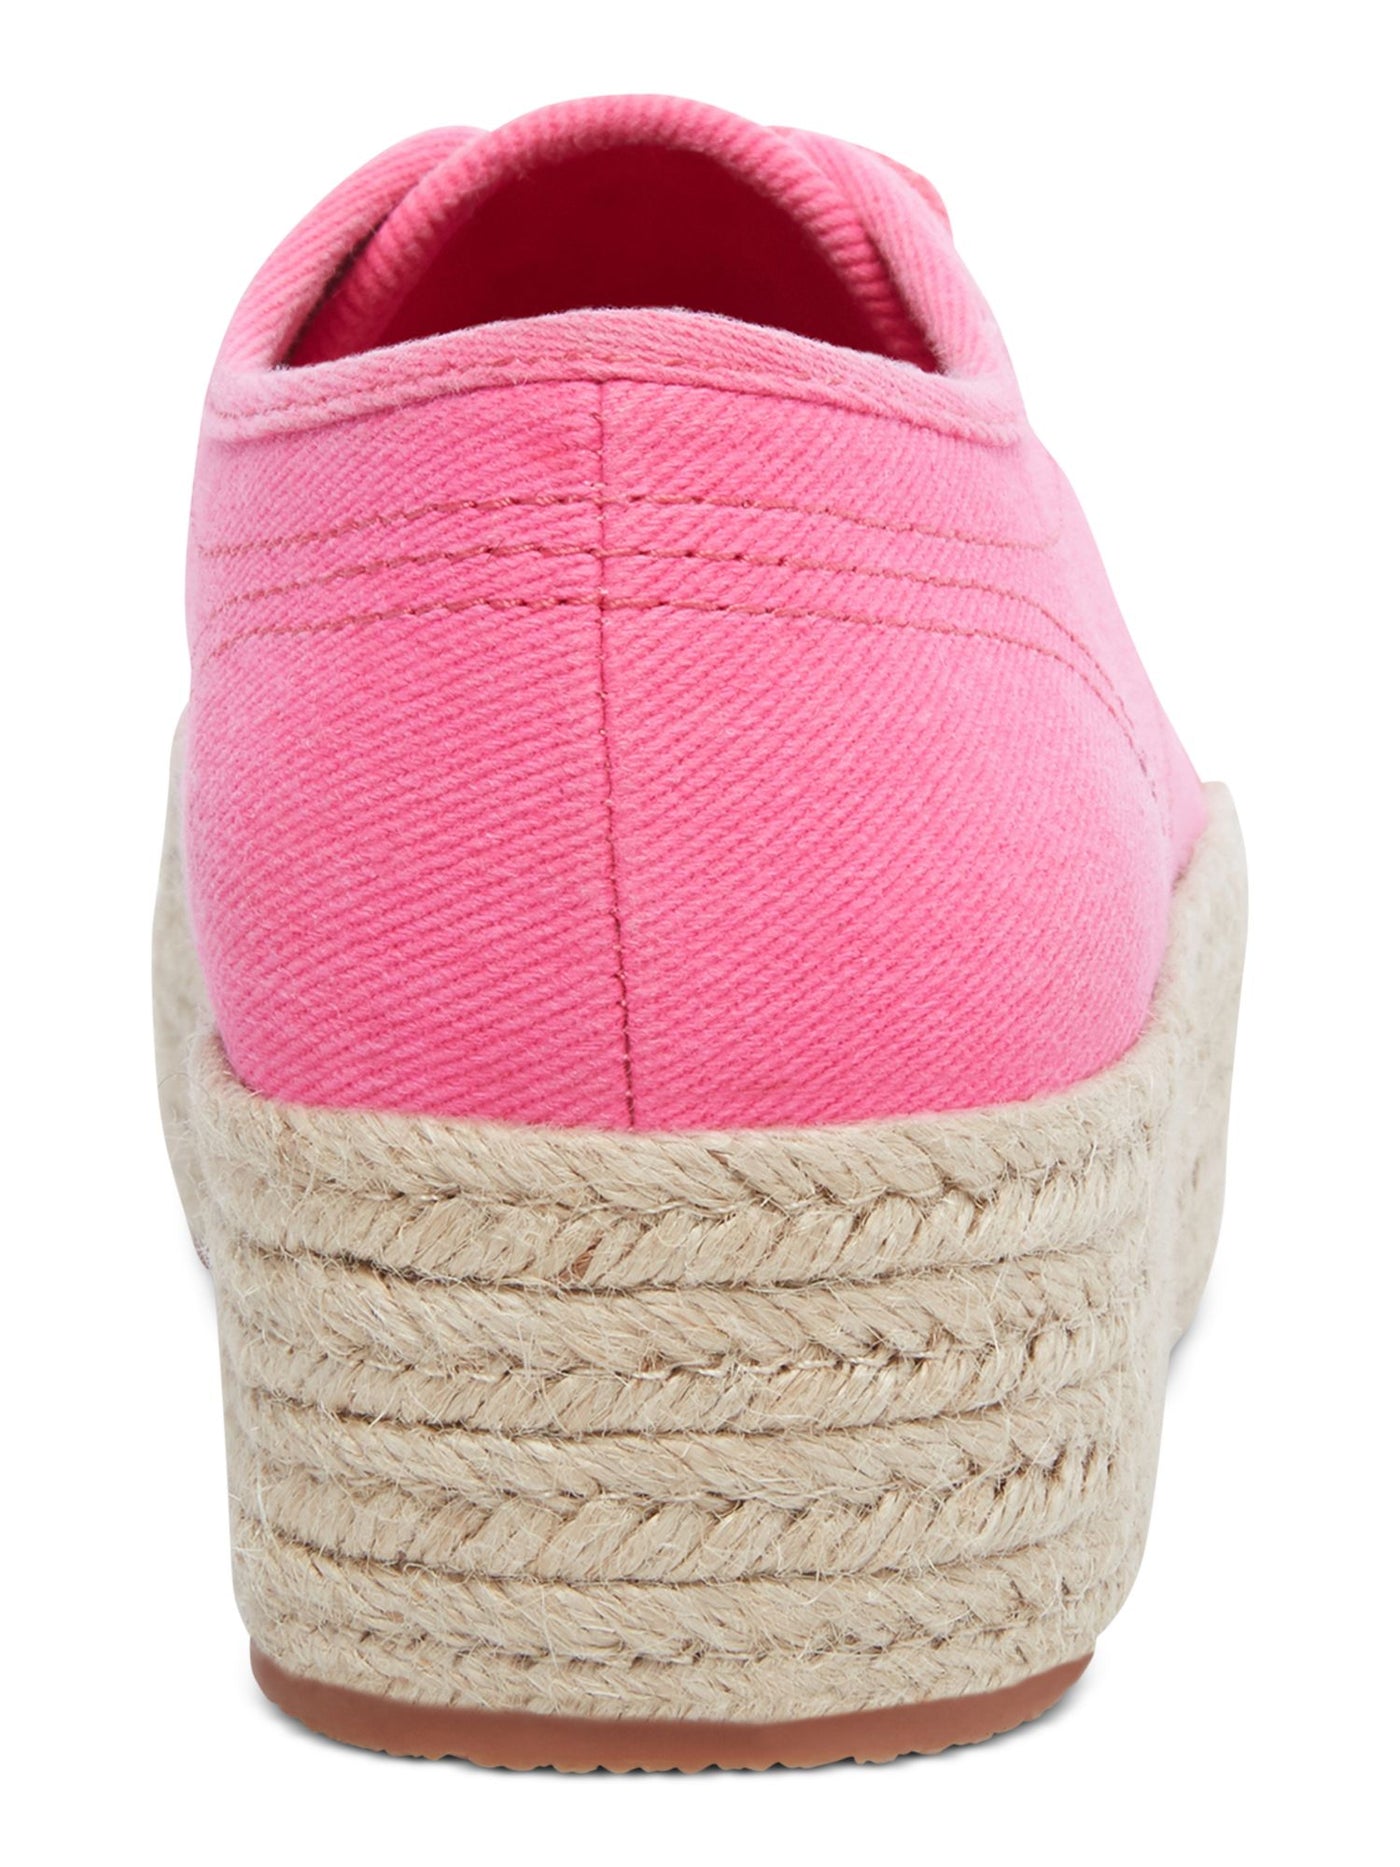 WILD PAIR Womens Pink Espadrille Cushioned Sofeya Round Toe Platform Lace-Up Athletic Sneakers Shoes 9.5 M